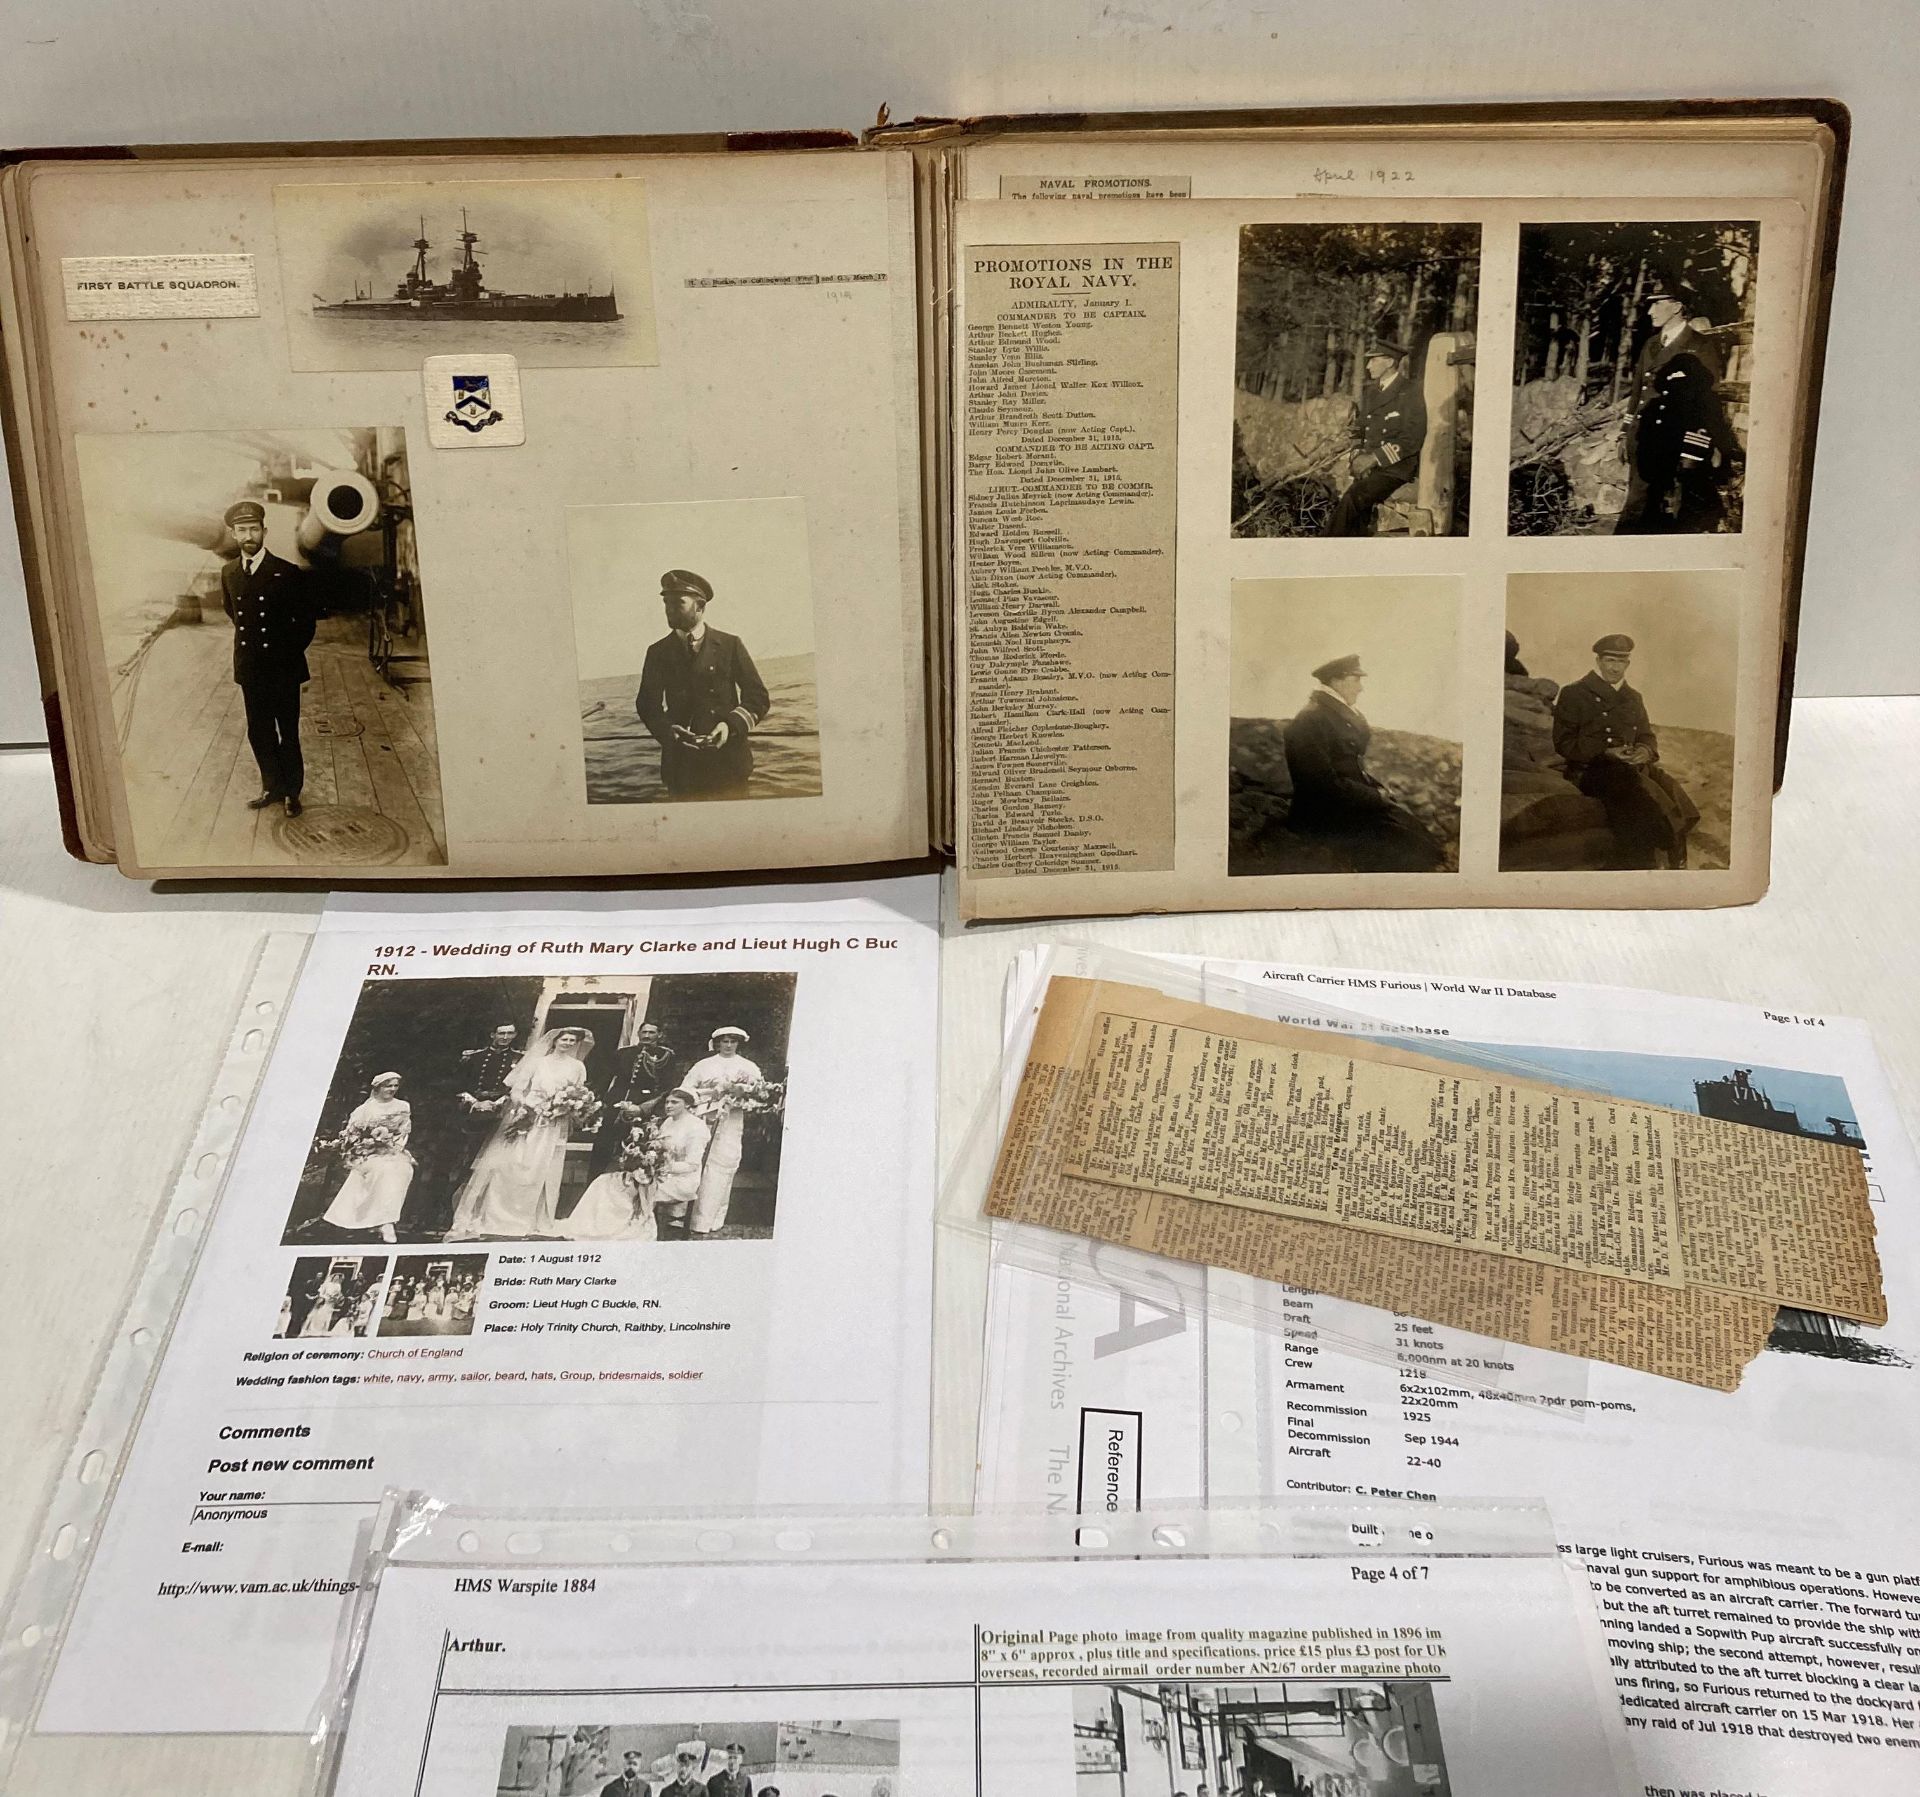 Photograph album and research relating to Rear Admiral Claude E. Buckle, Royal Navy. - Image 3 of 5